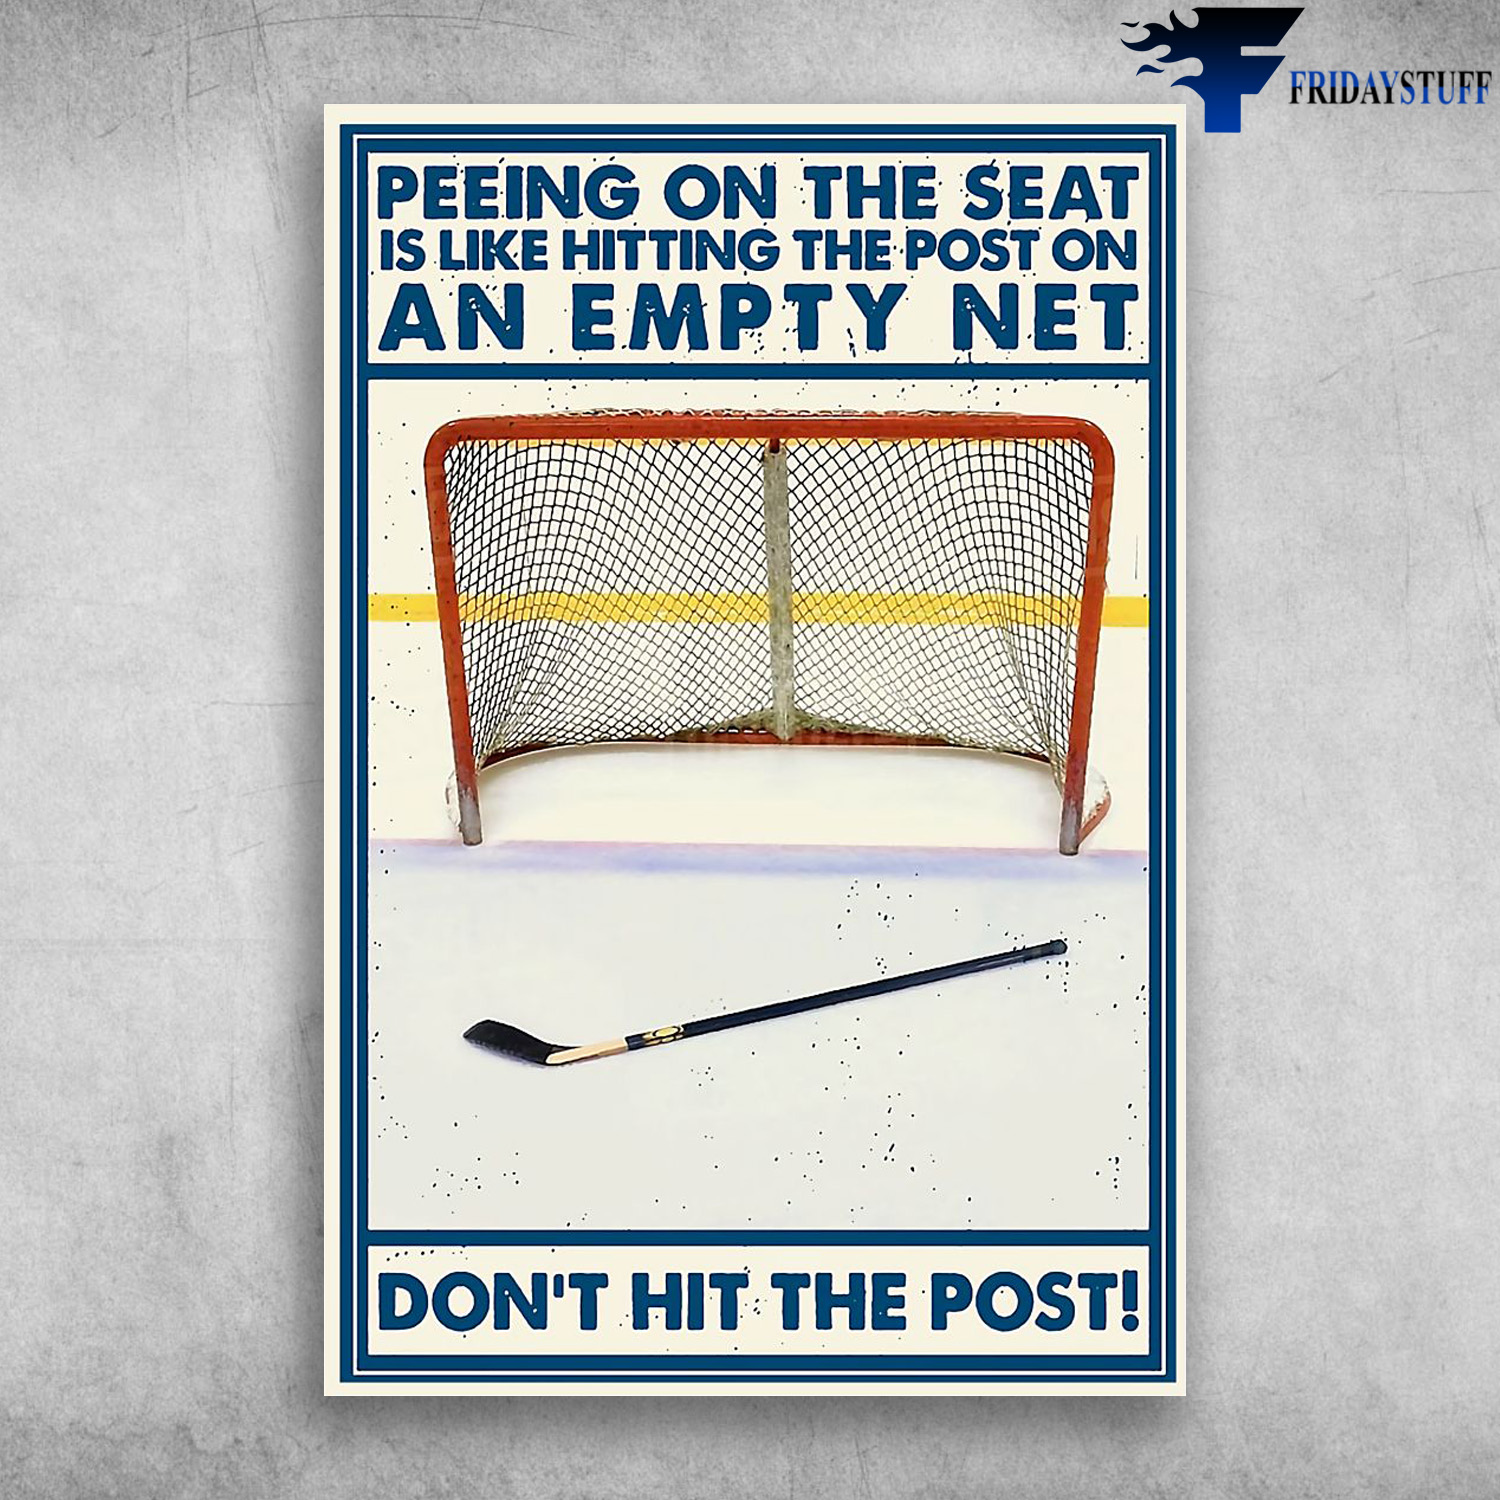 Hockey - Peeing On The Seat Is Like Hitting The Post On An Empty Net, Don't Hit The Post